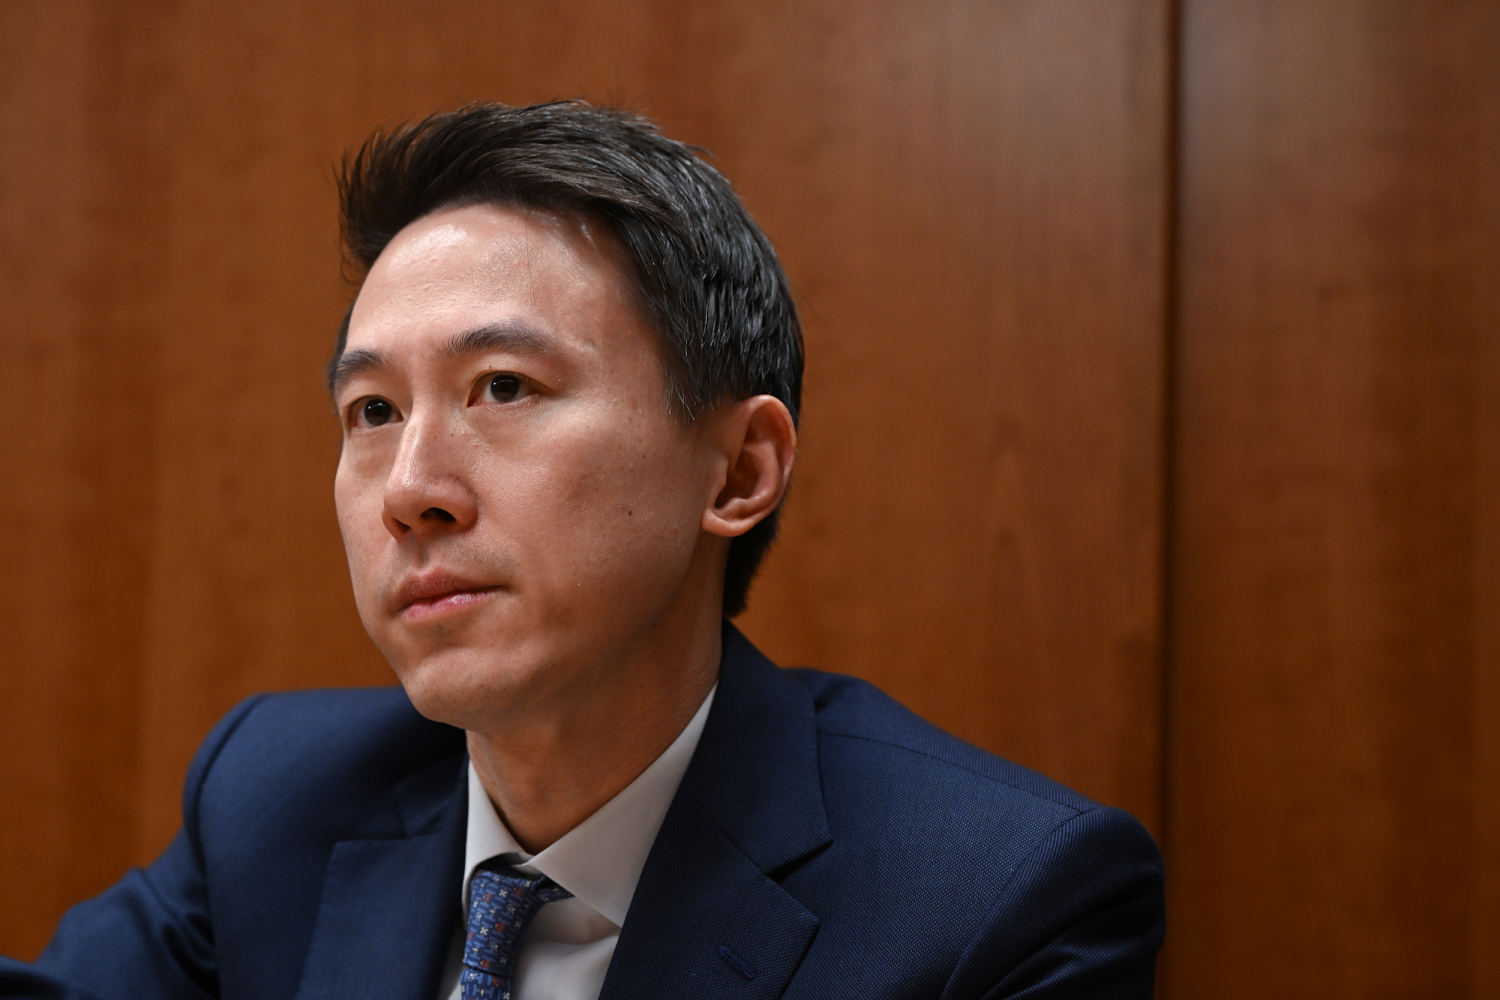 TikTok CEO Shou Chew says fight over ban will head to court: ‘We aren’t going anywhere’